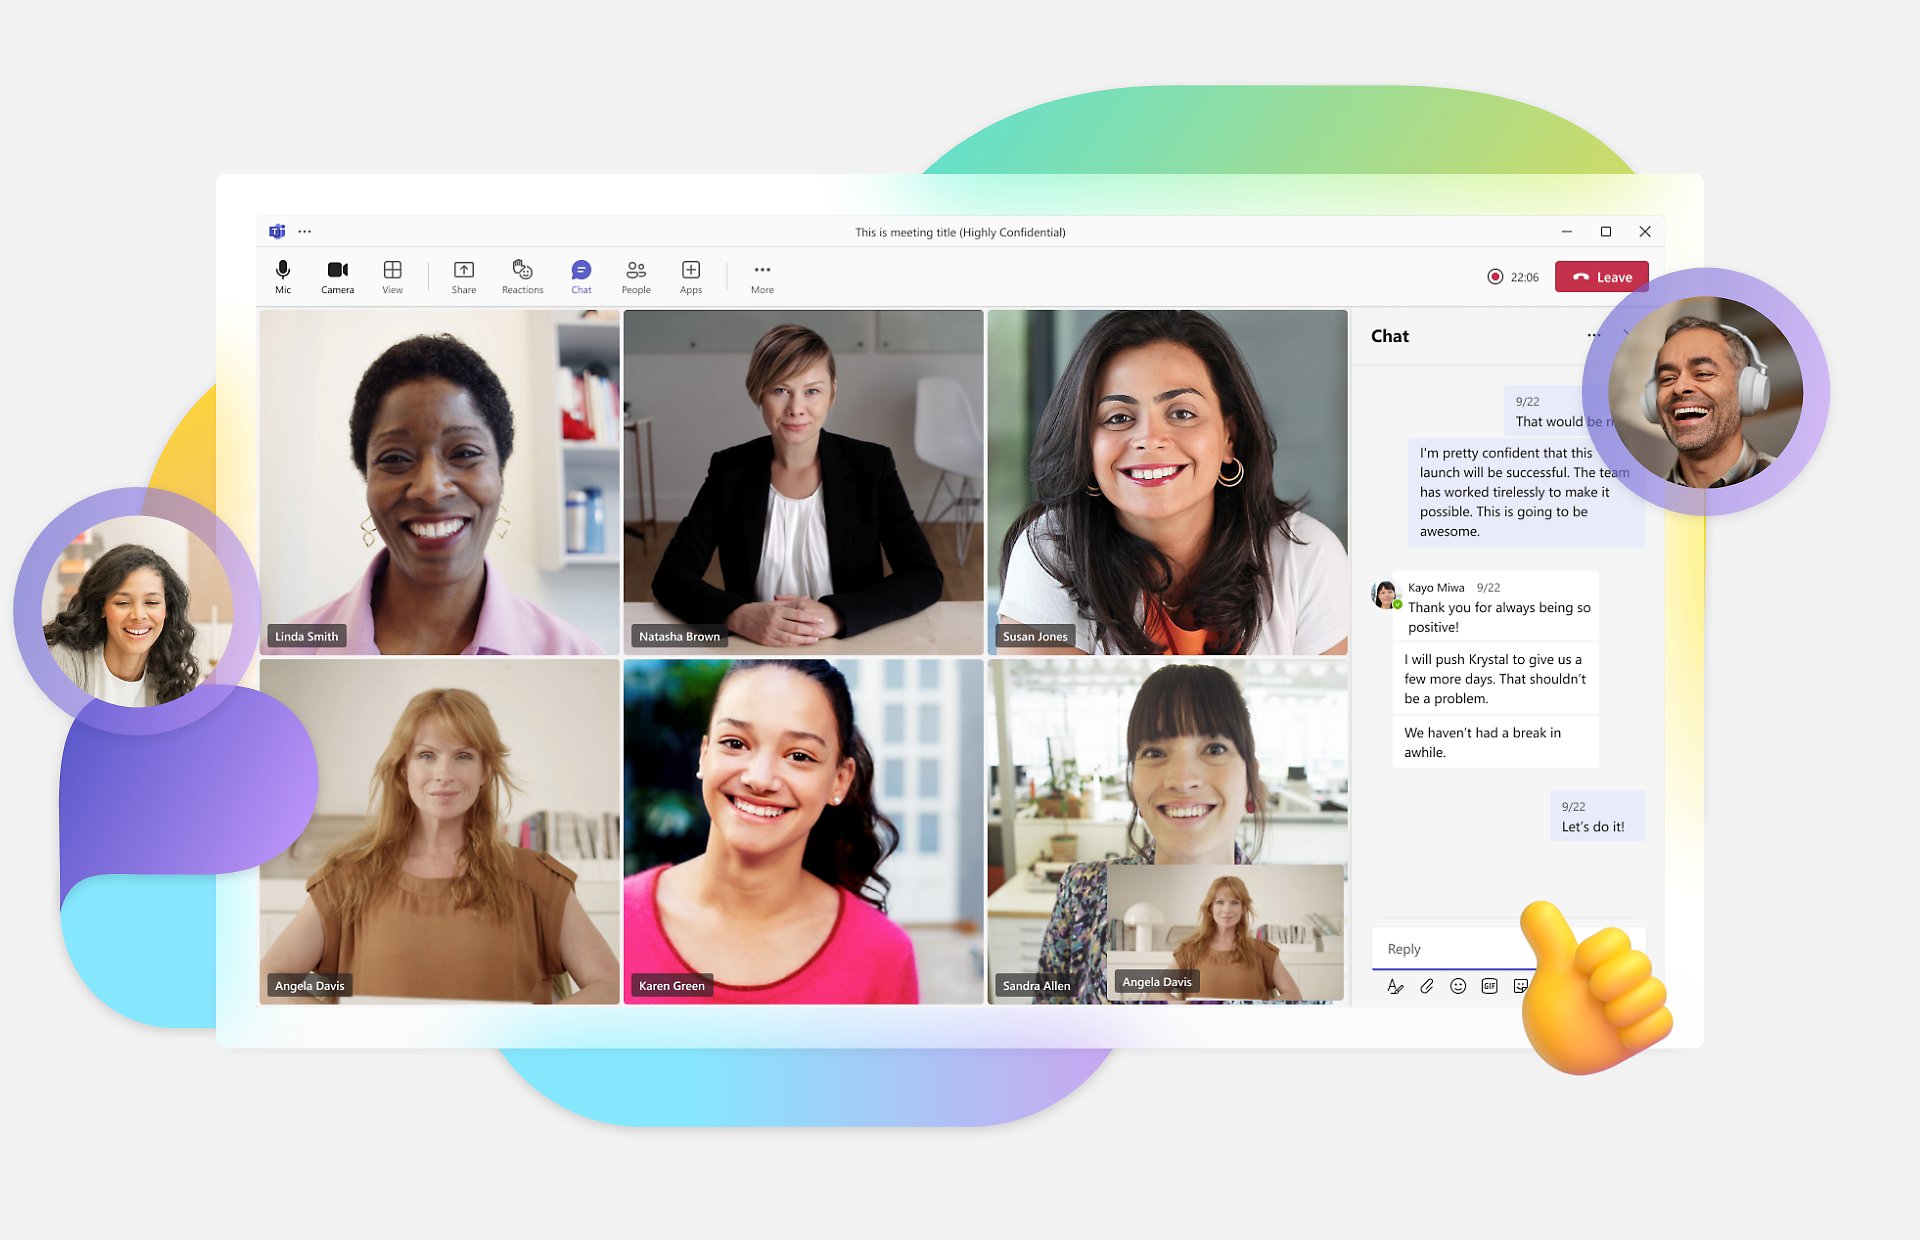 Integrate Microsoft Teams with Live Chat, Video Chat, and More